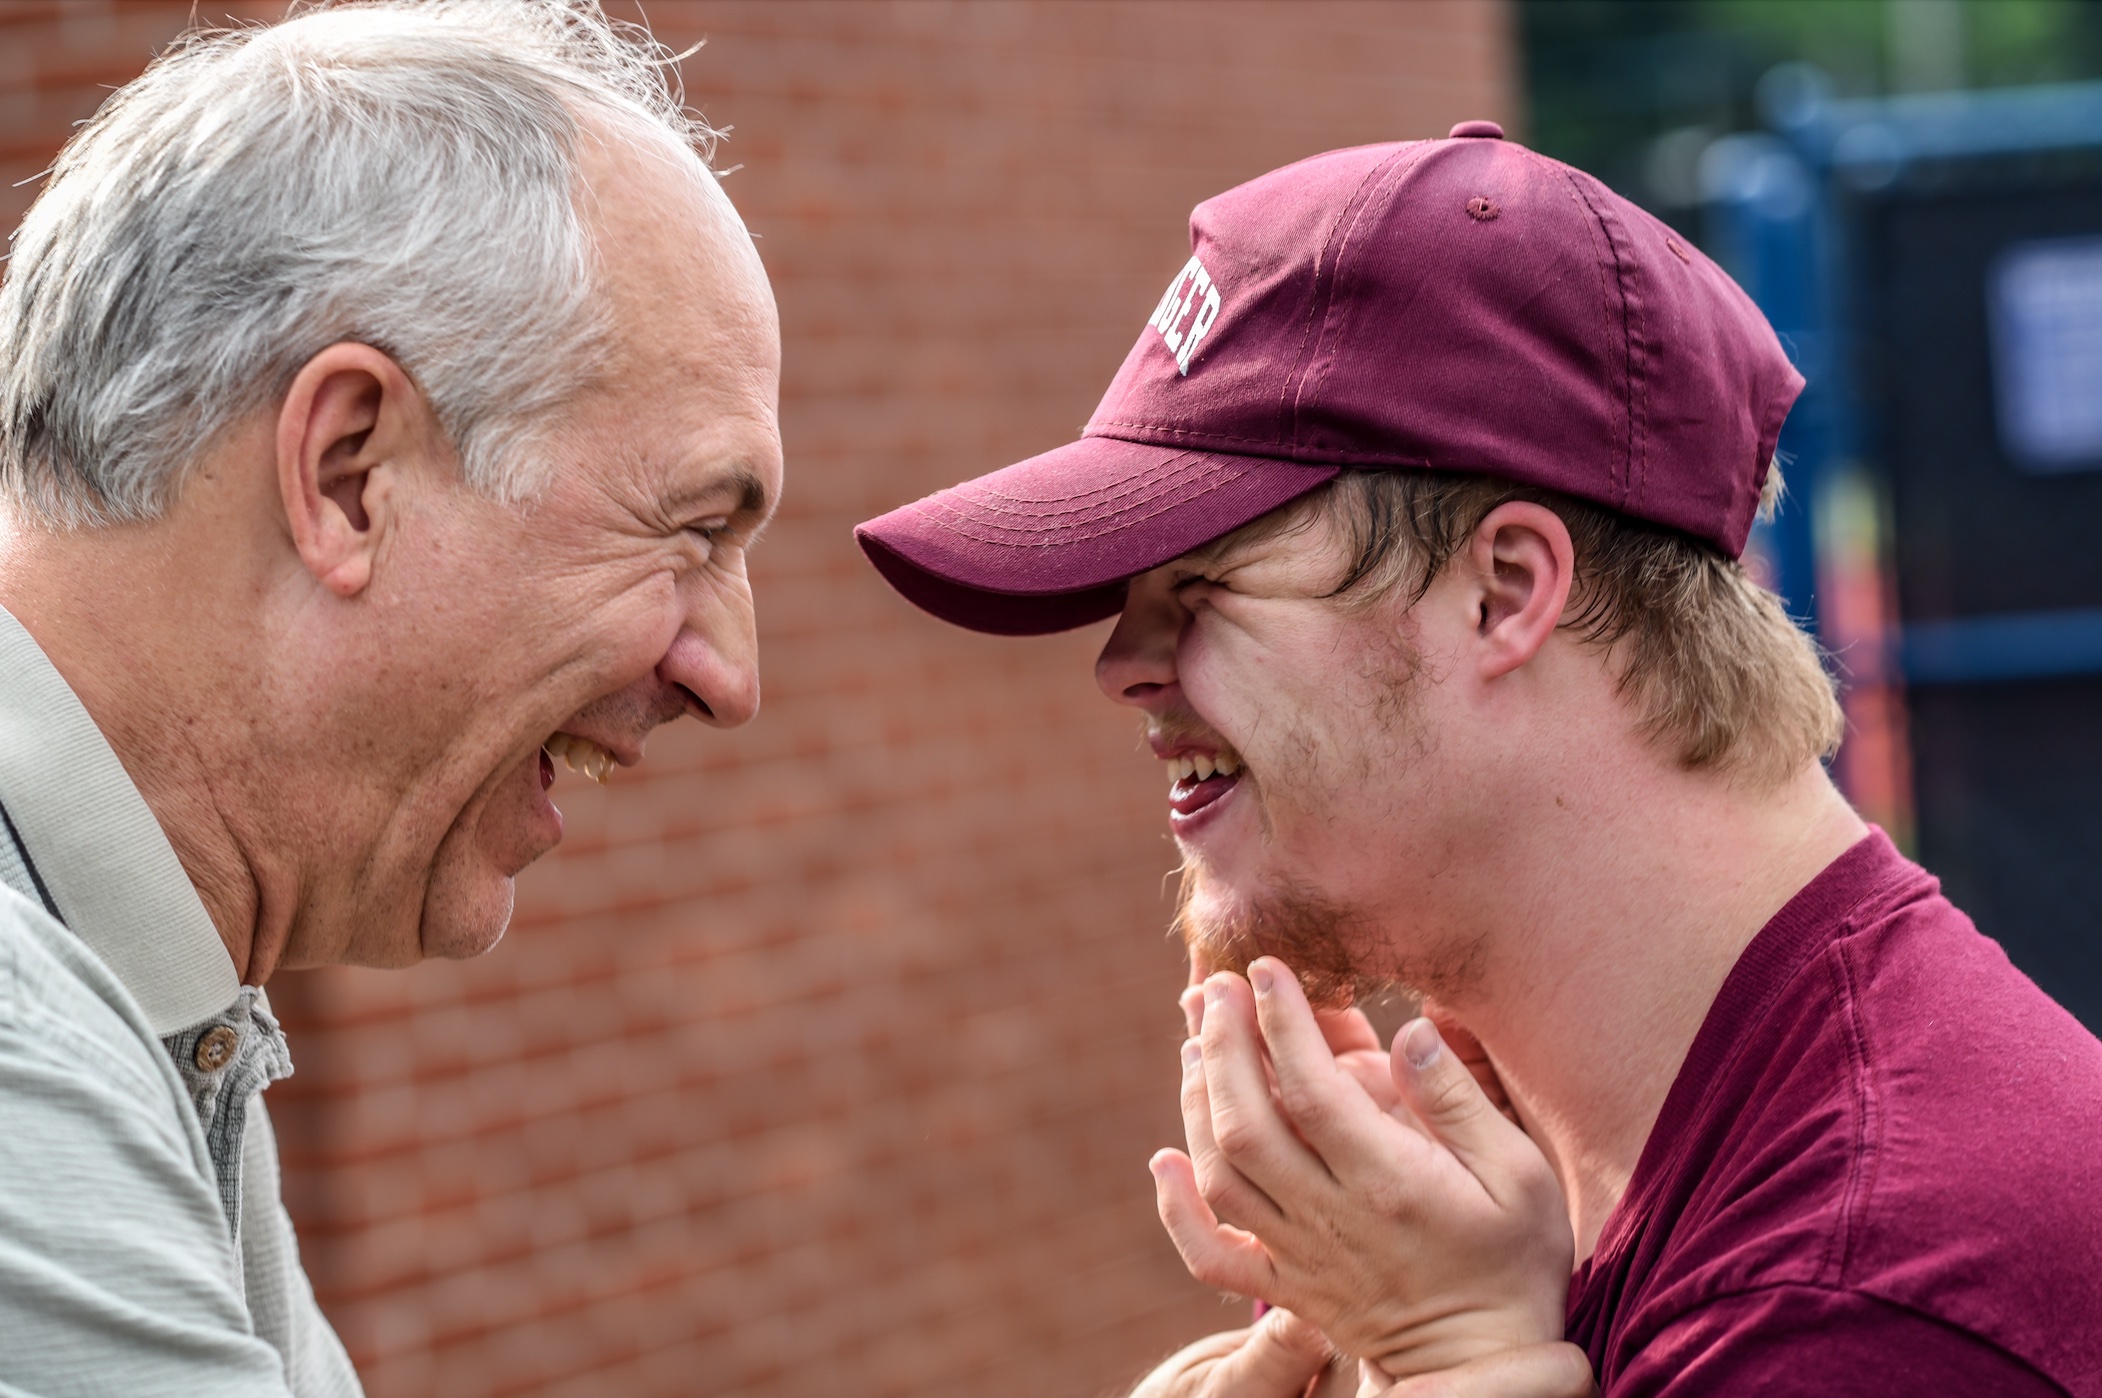 Moment of laughter between older man and younger man with Down Syndrome; image by Nathan Anderson, via Unsplash.com.